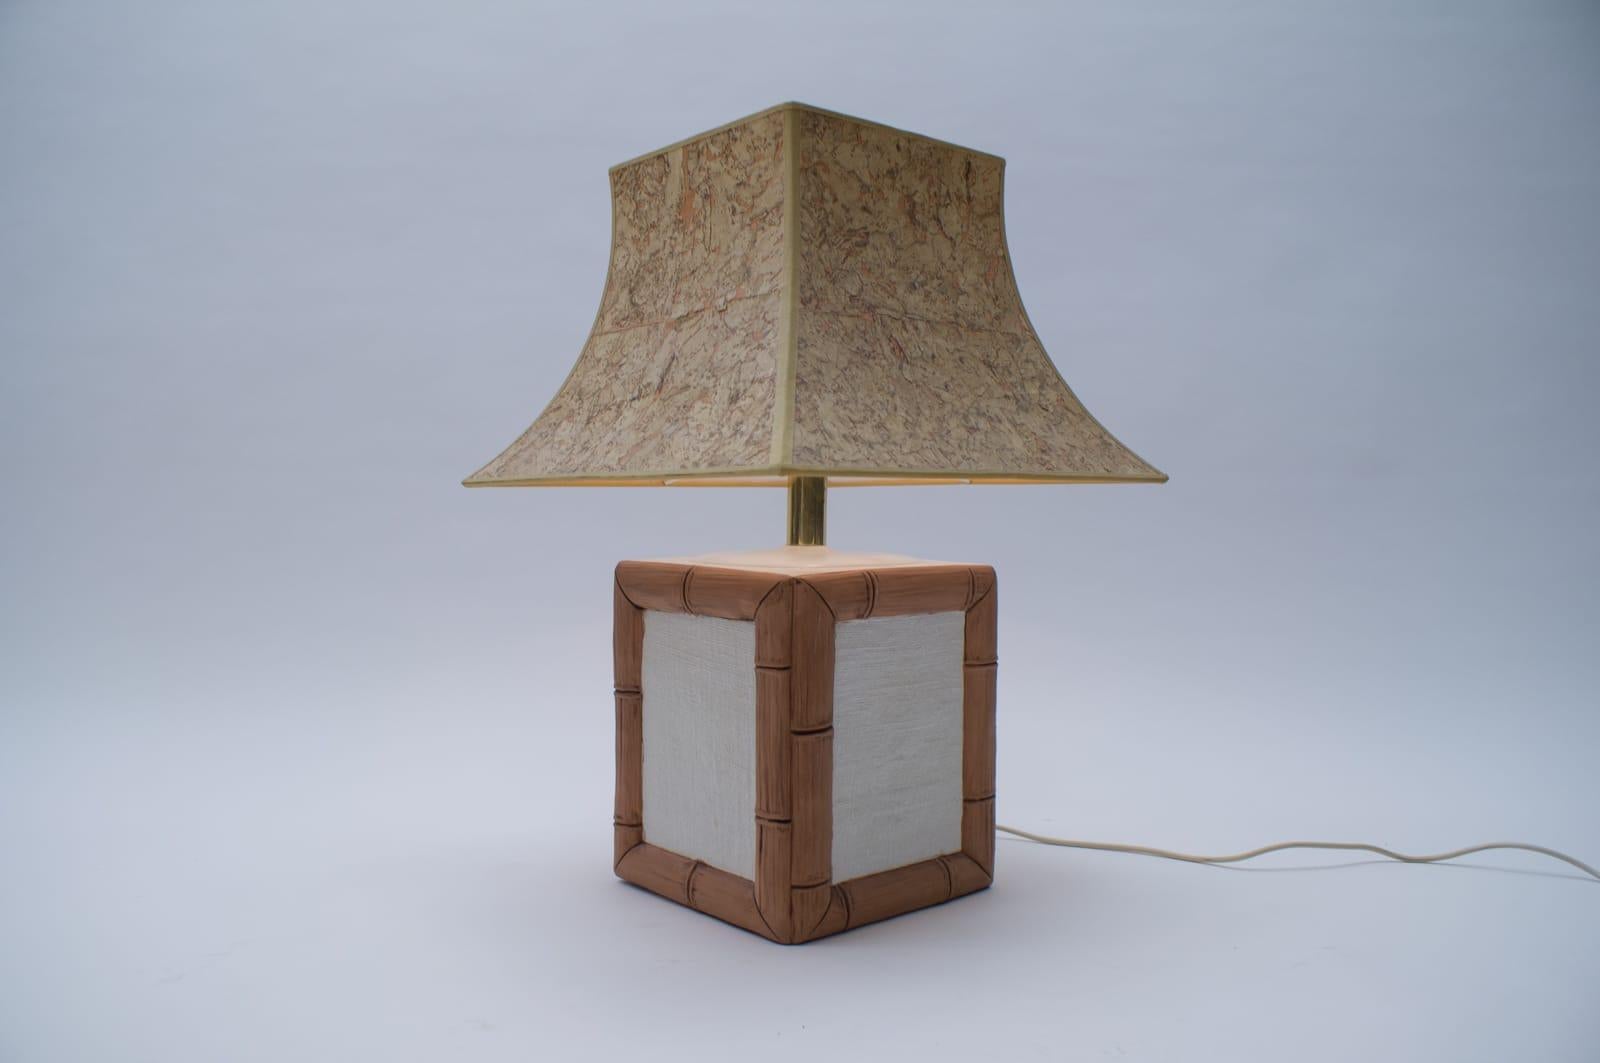 Japonisme Ceramic Table Lamp with Cork Shade in Japan Bamboo Look by Leola, 1970s, Germany For Sale